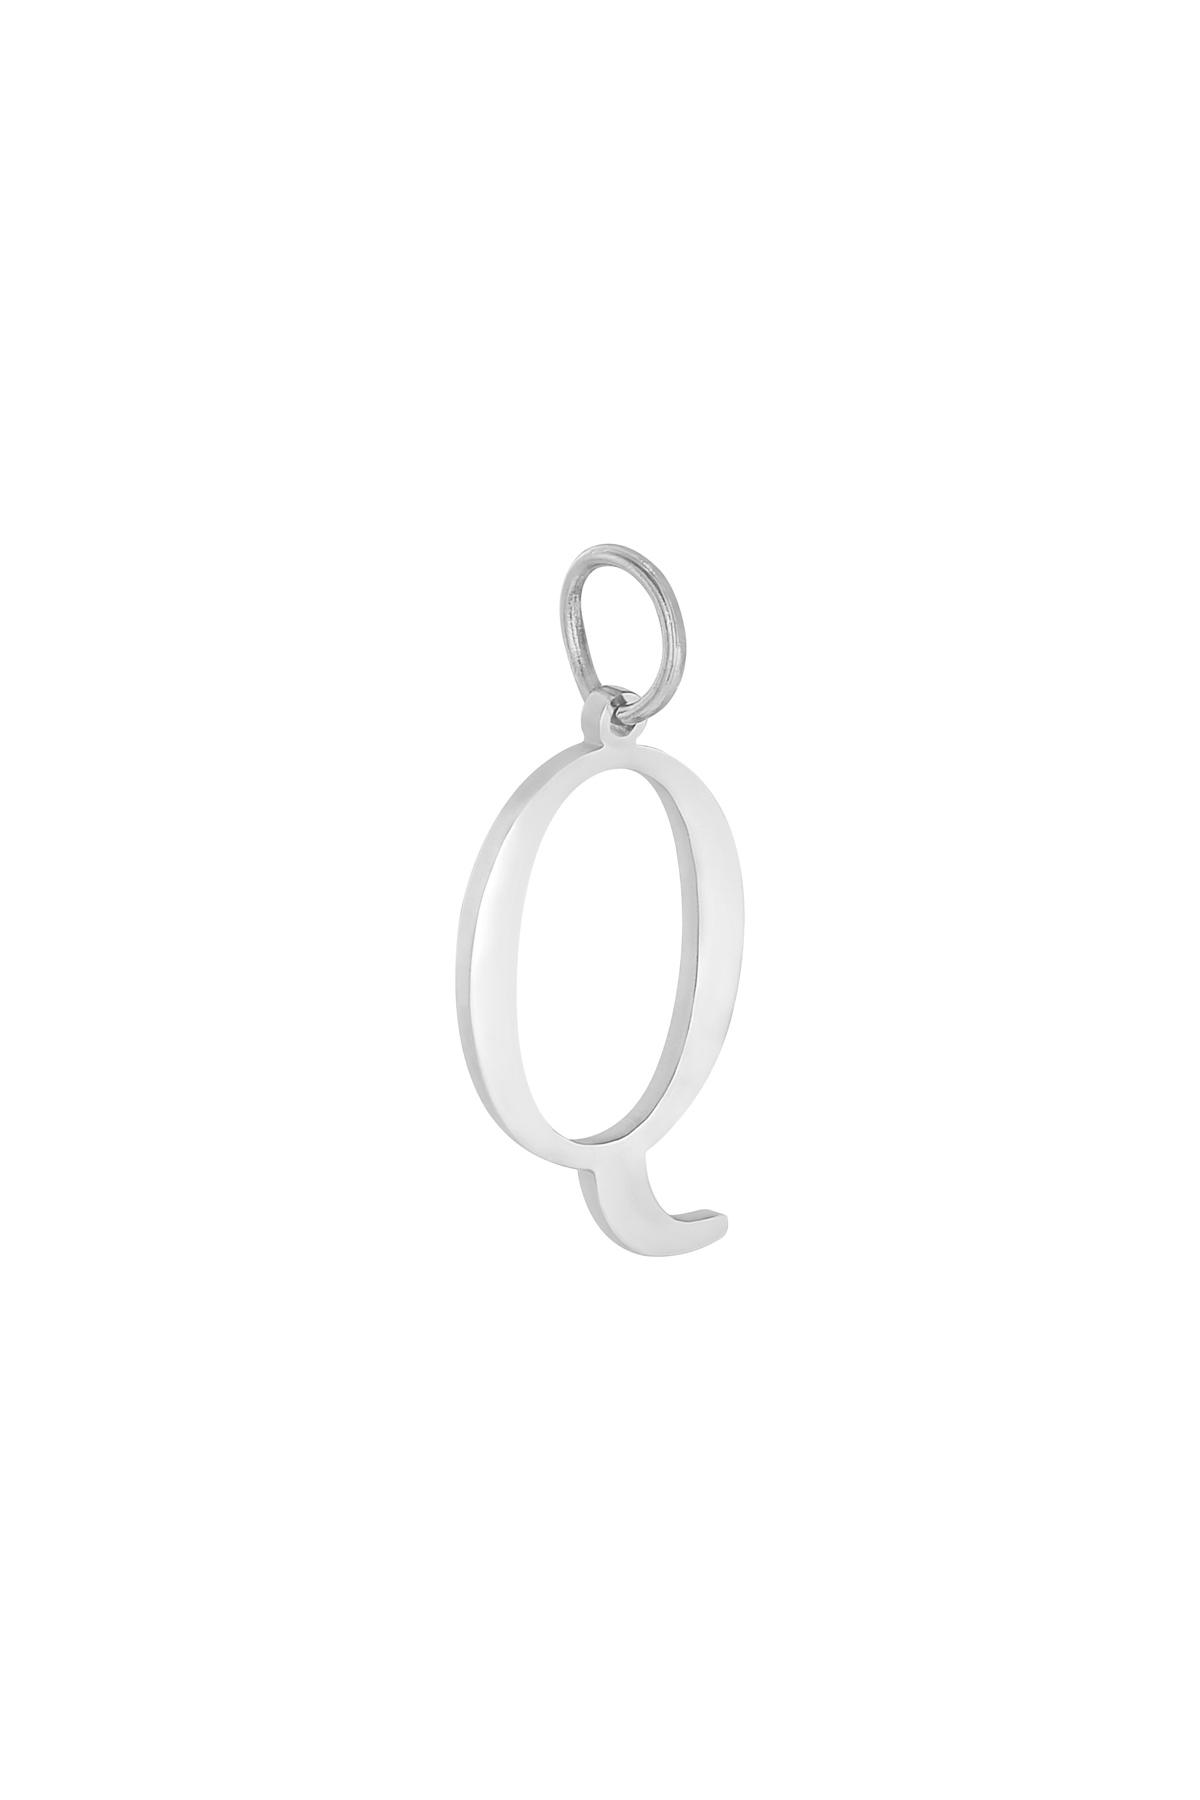 Silver / Charm Q Silver Stainless Steel Immagine22